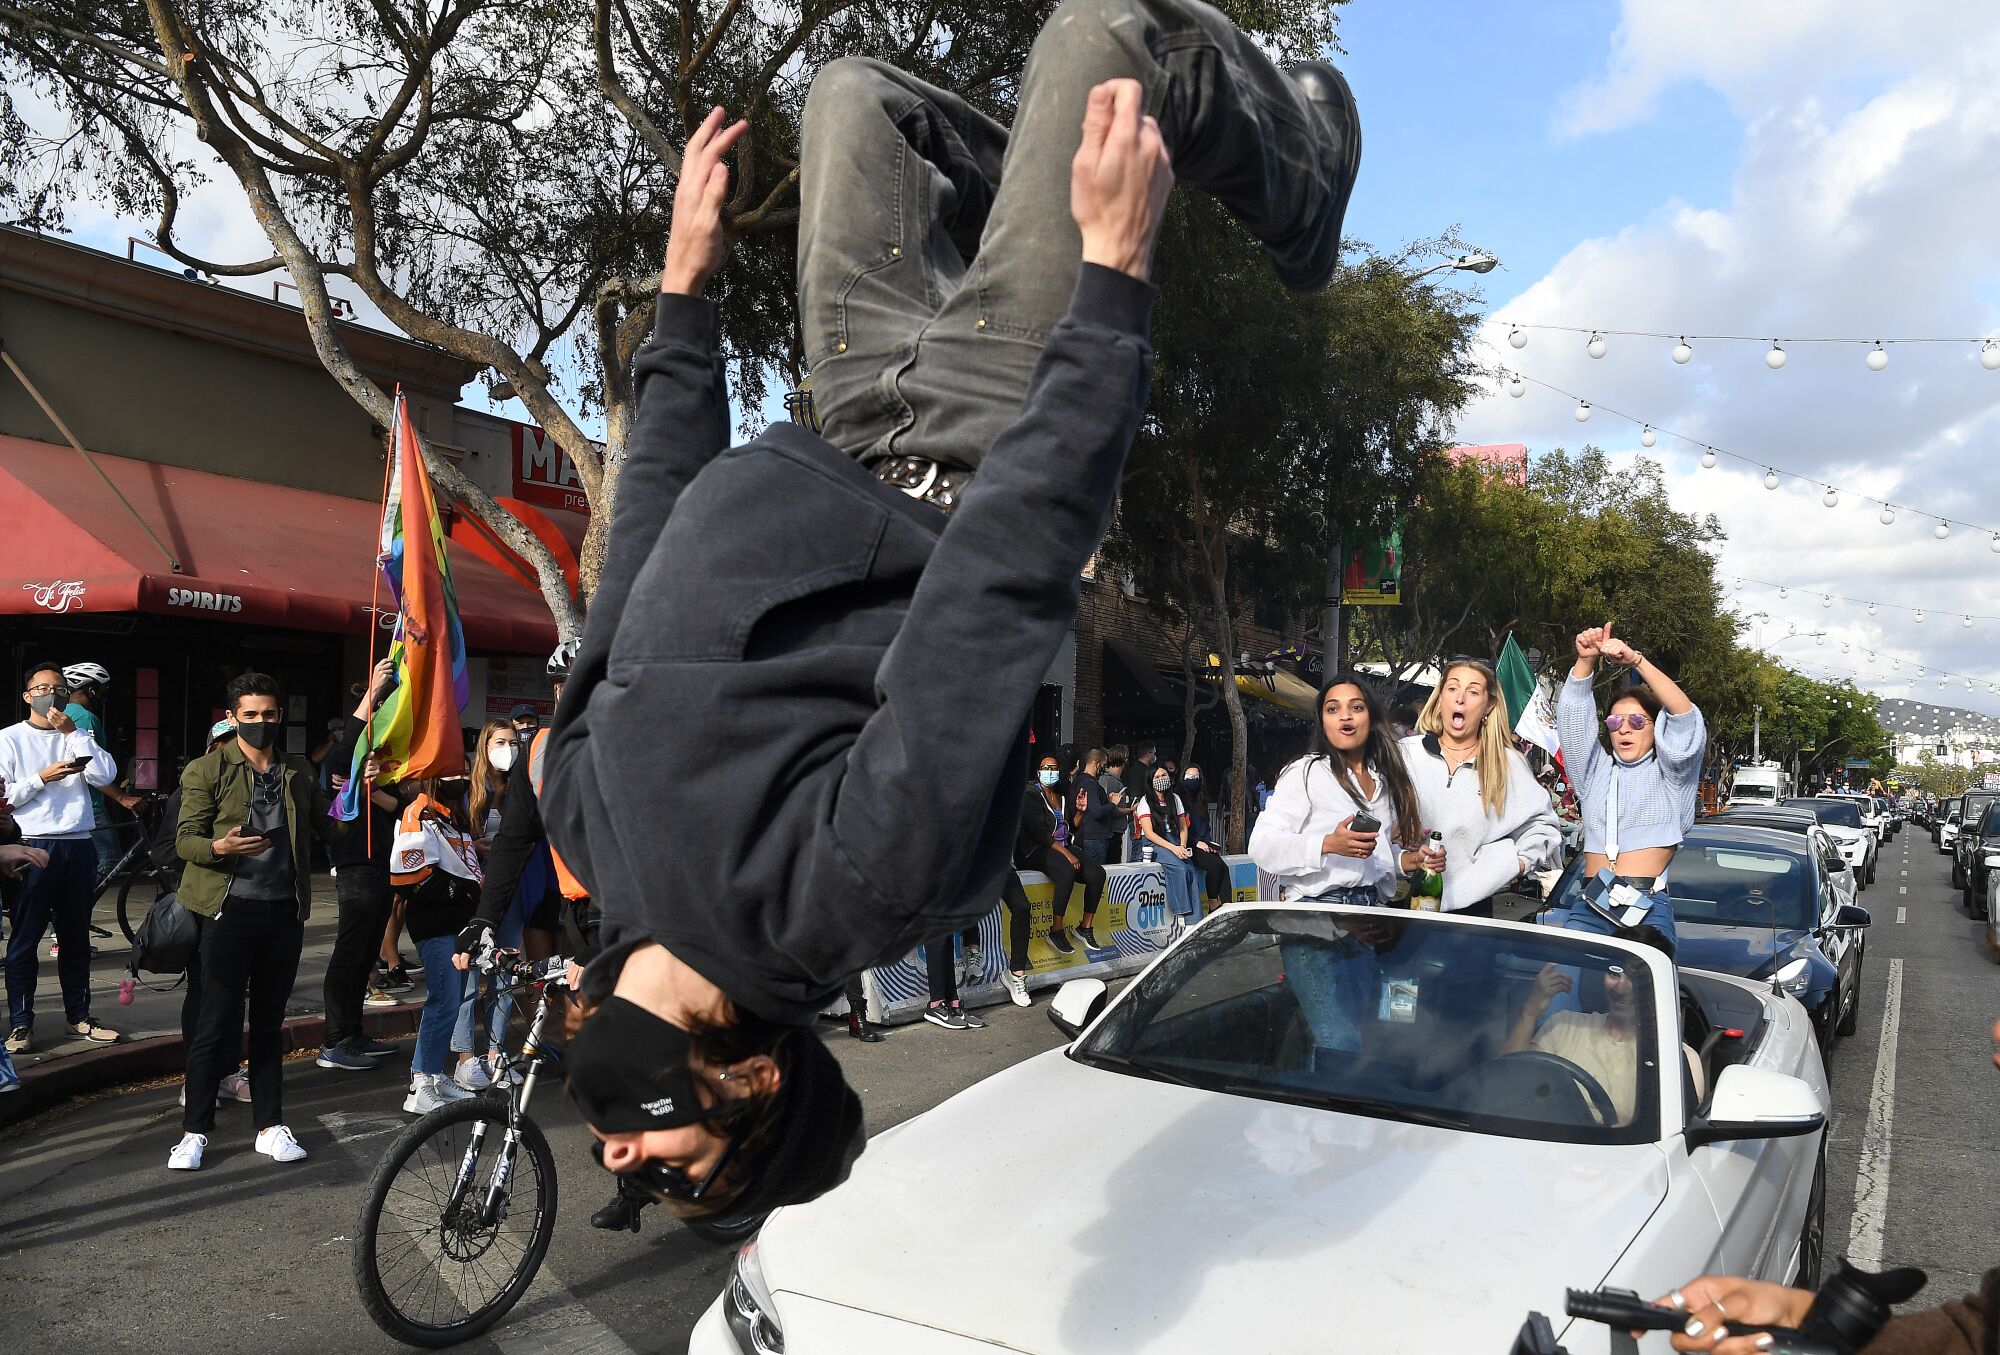 A person does a back flip off the hood of a car in celebration along Santa Monica Boulevard in West Hollywood.